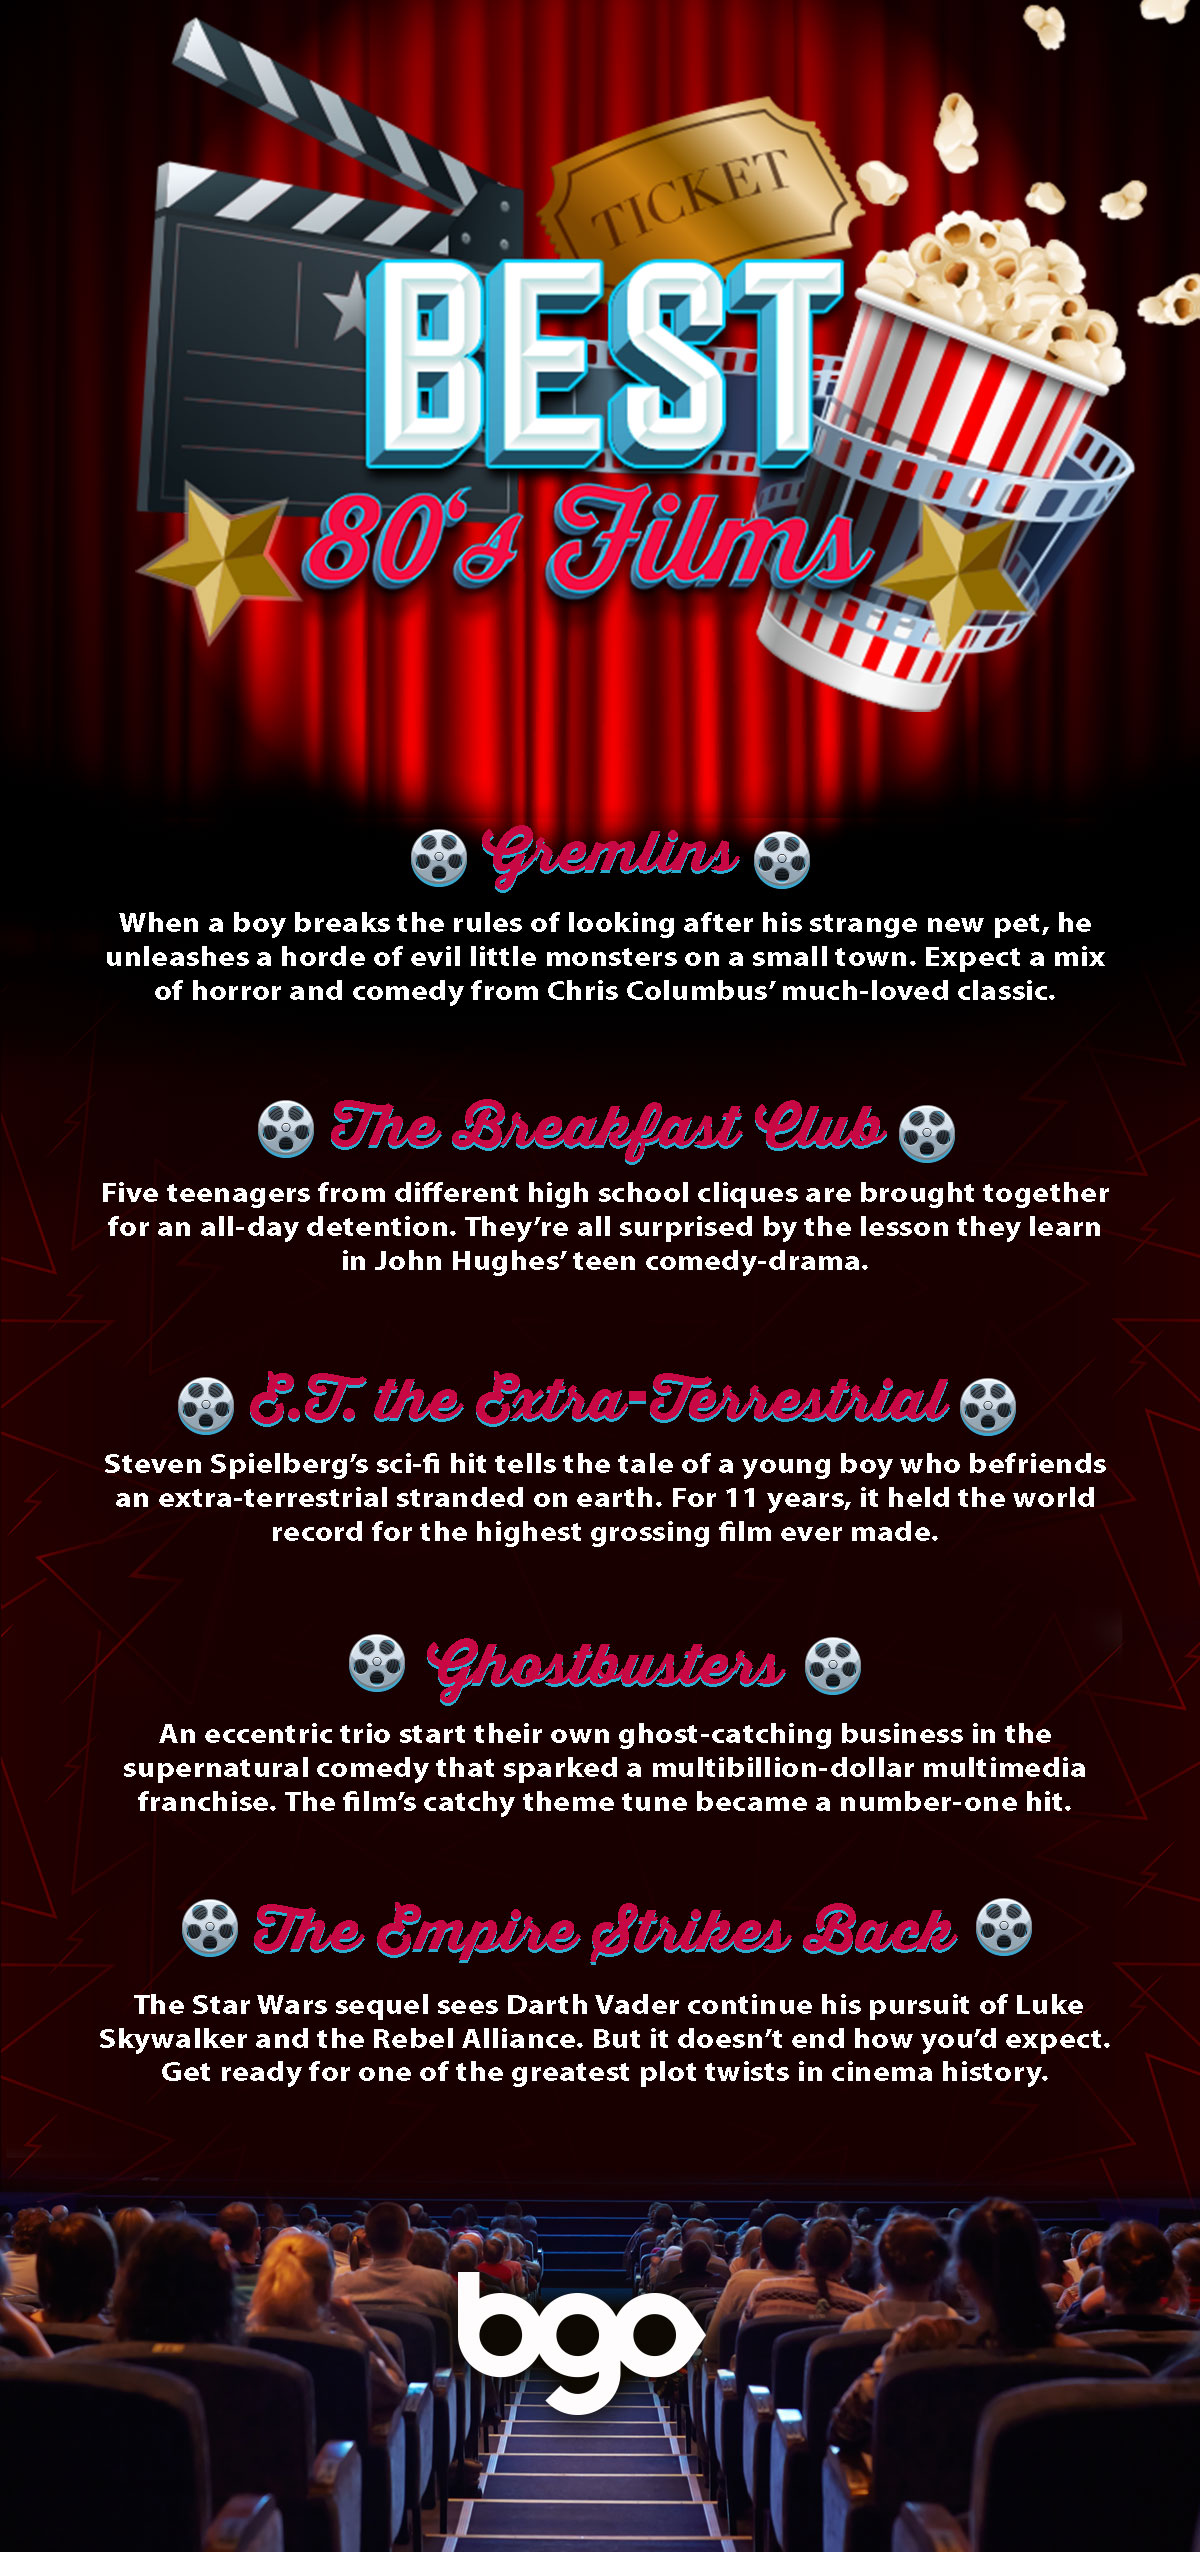 Best 80s Films infographic 1